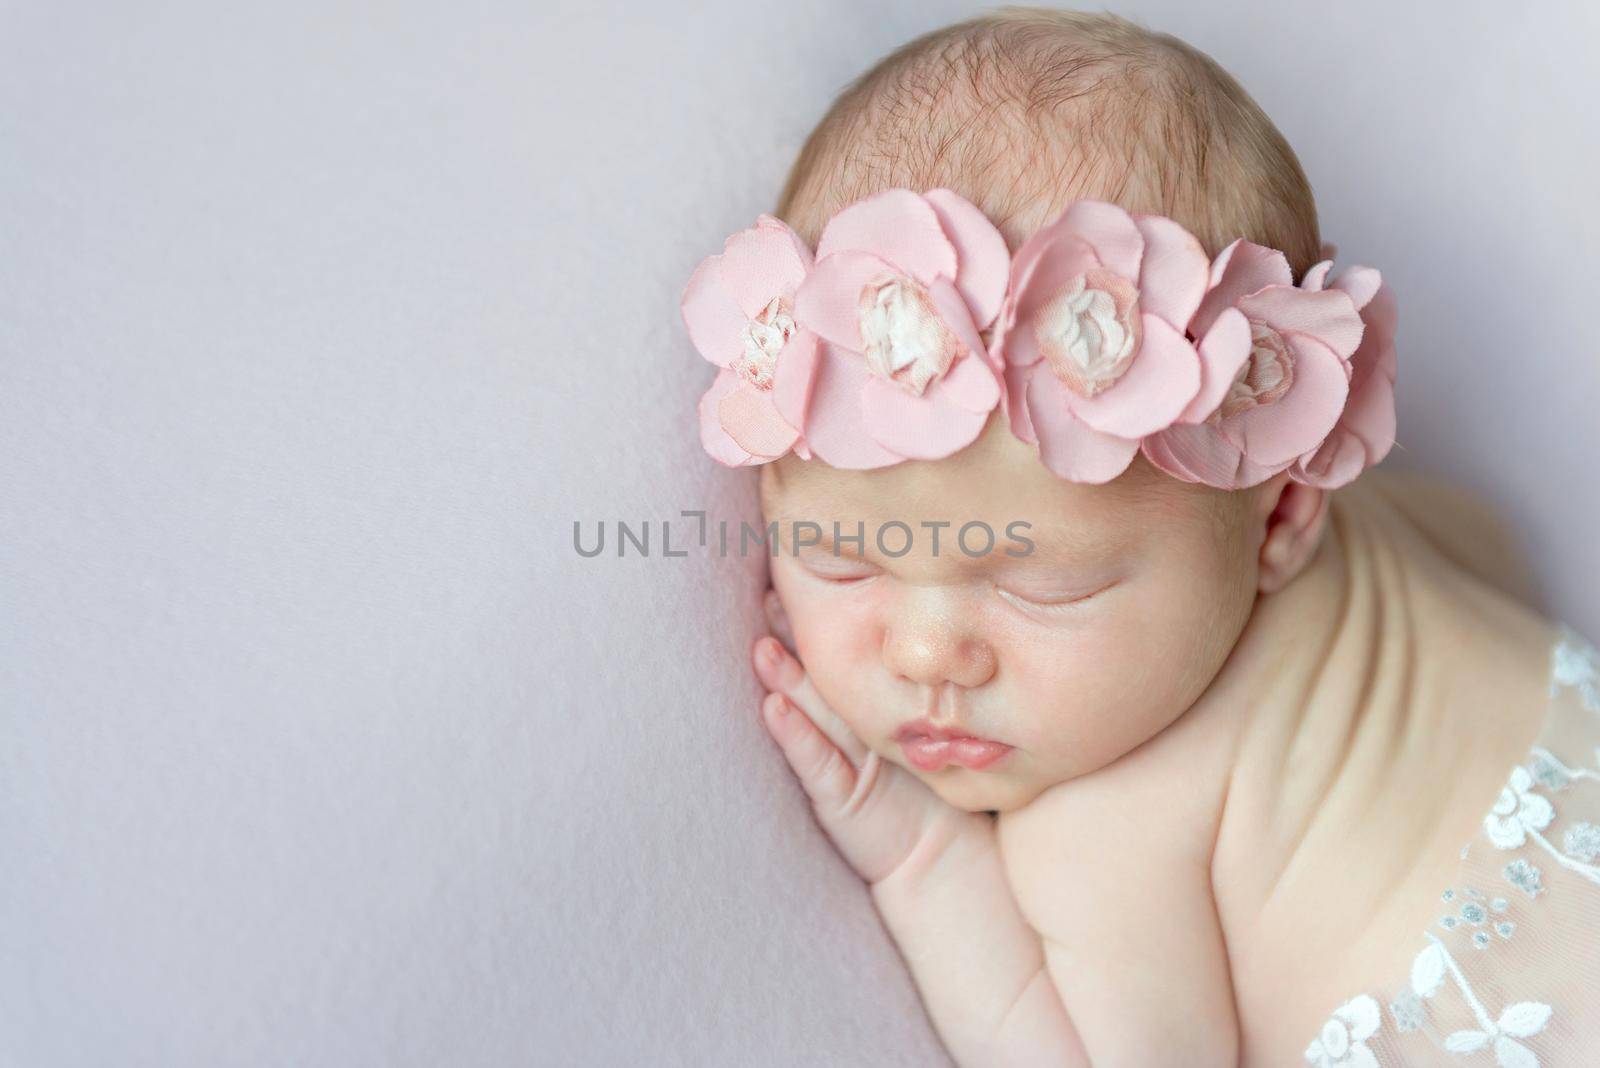 girl with pink flowers on her head napping by tan4ikk1